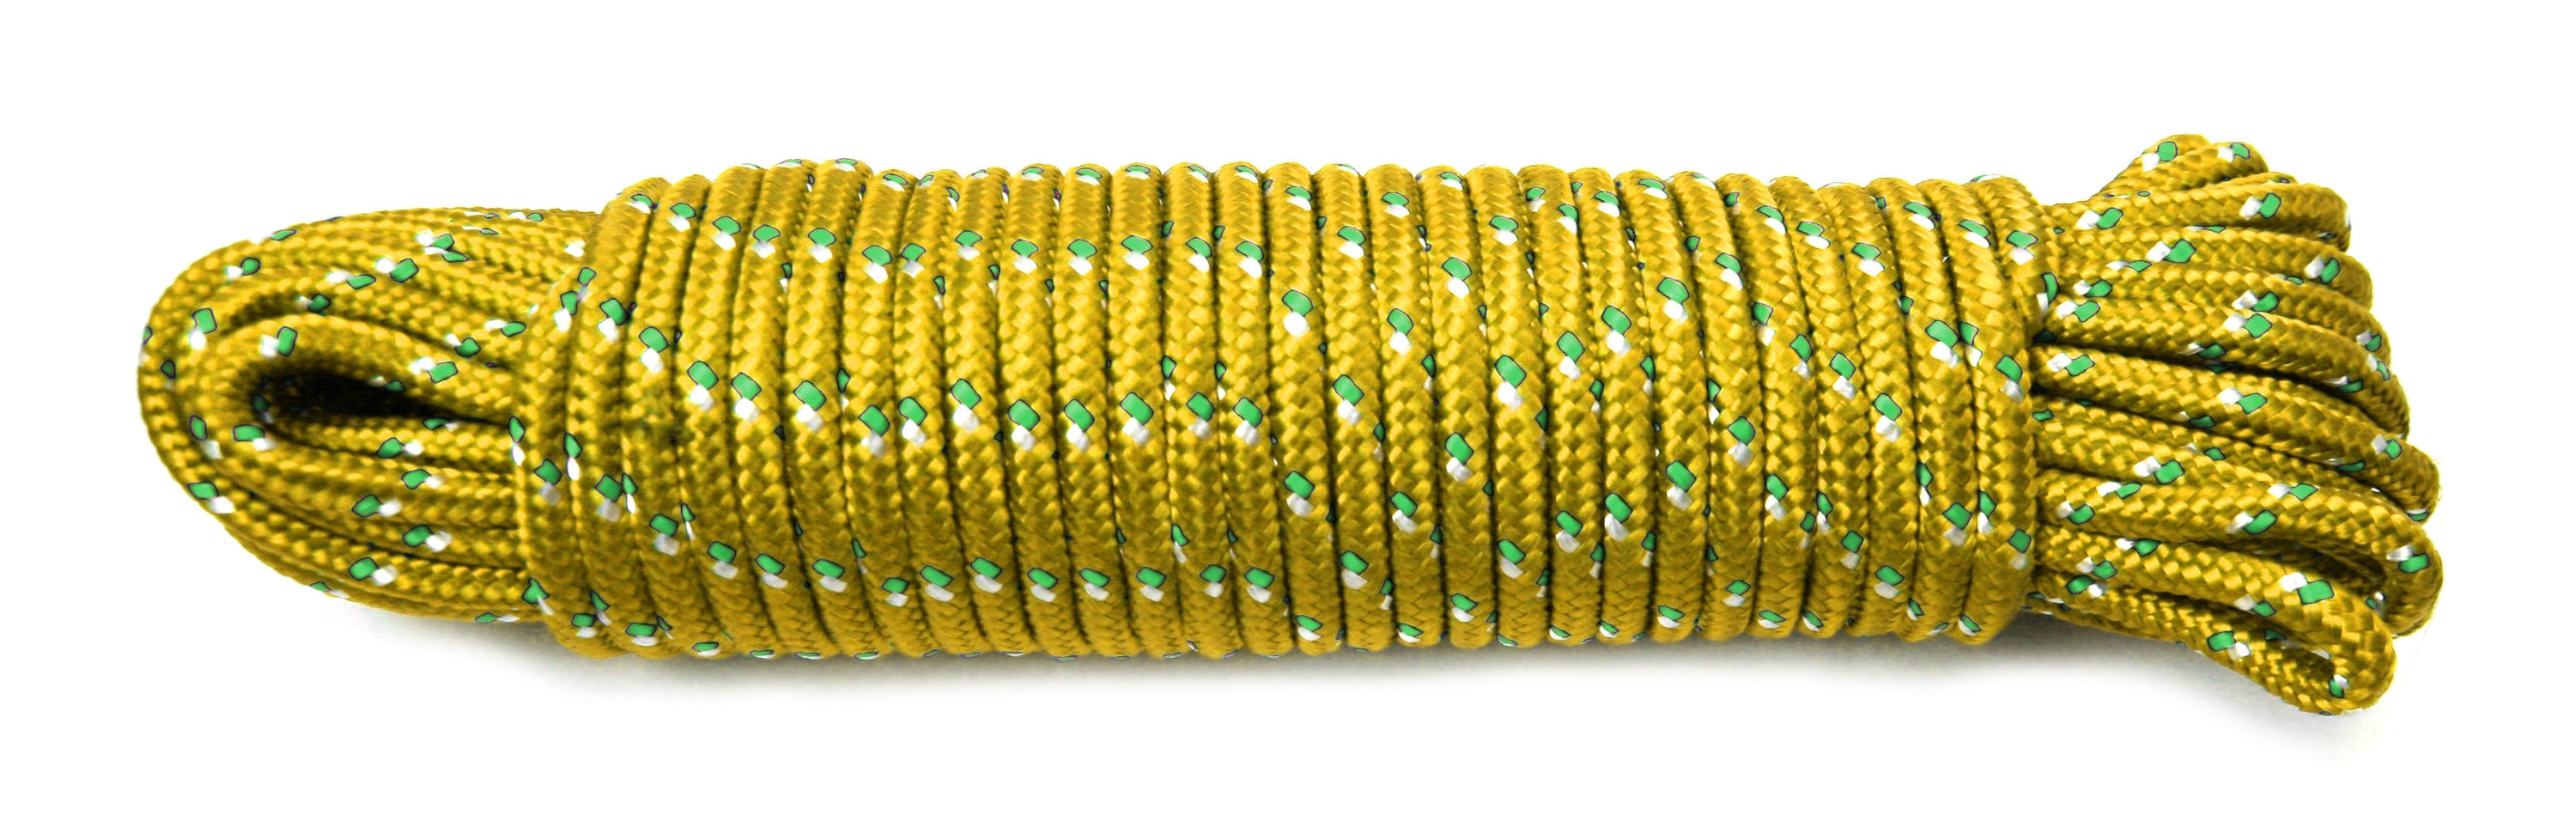 SecureLine 0.25-in x 200-ft Braided Polypropylene Rope at